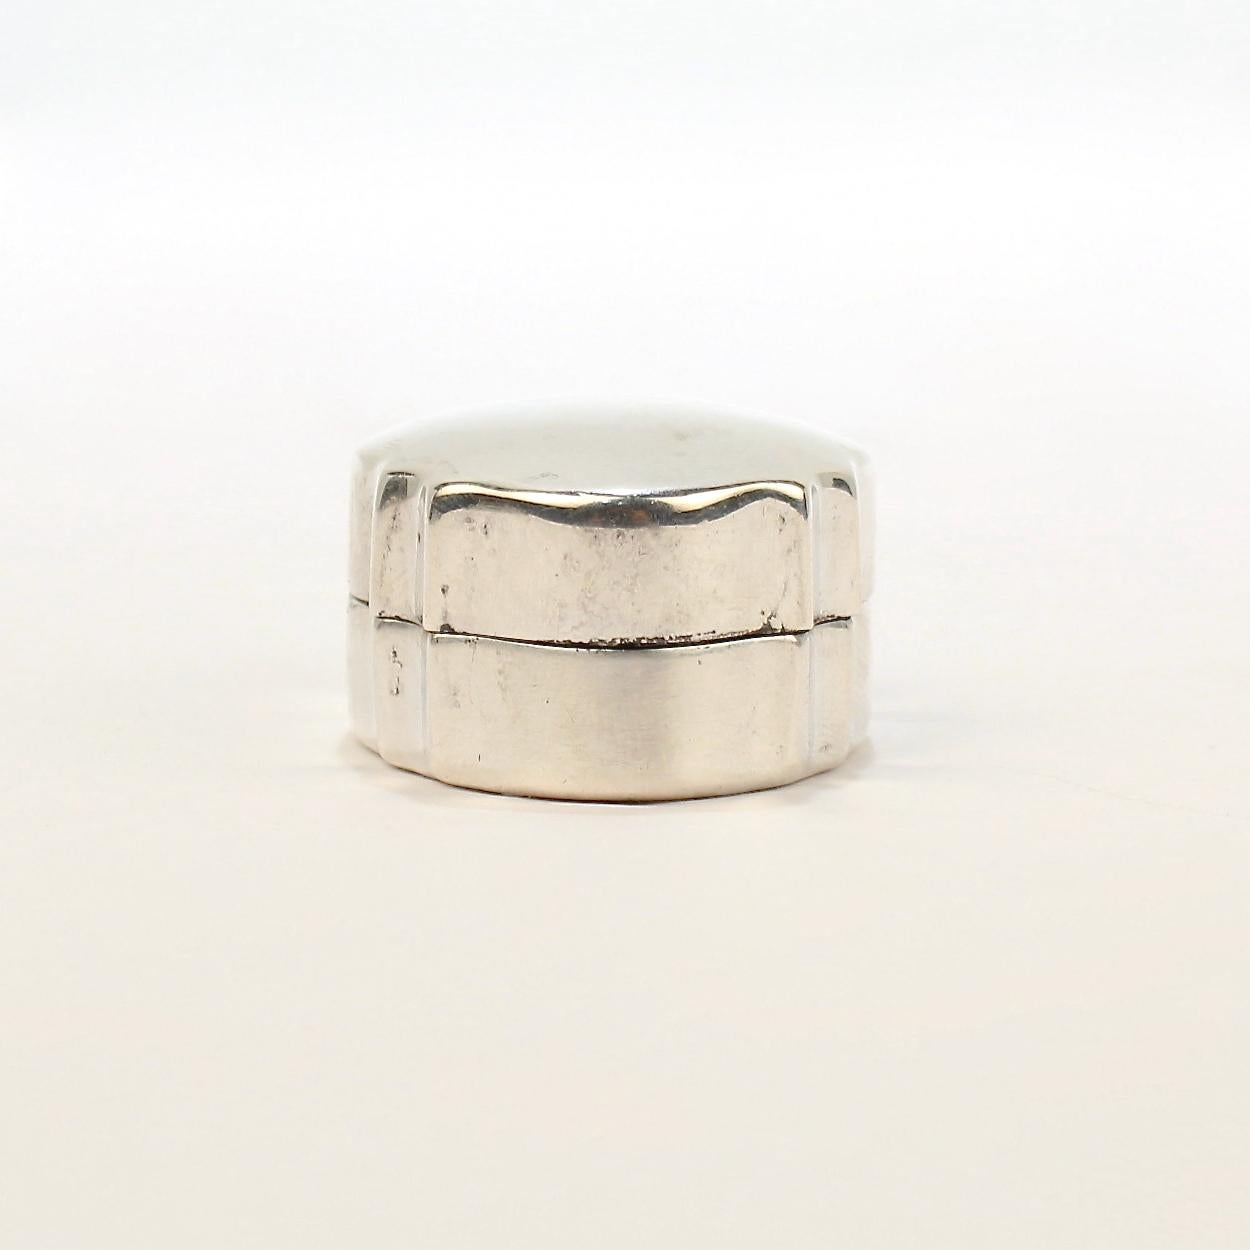 Modern Gucci Sterling Silver Pill Box from the Mario Buatta Collection